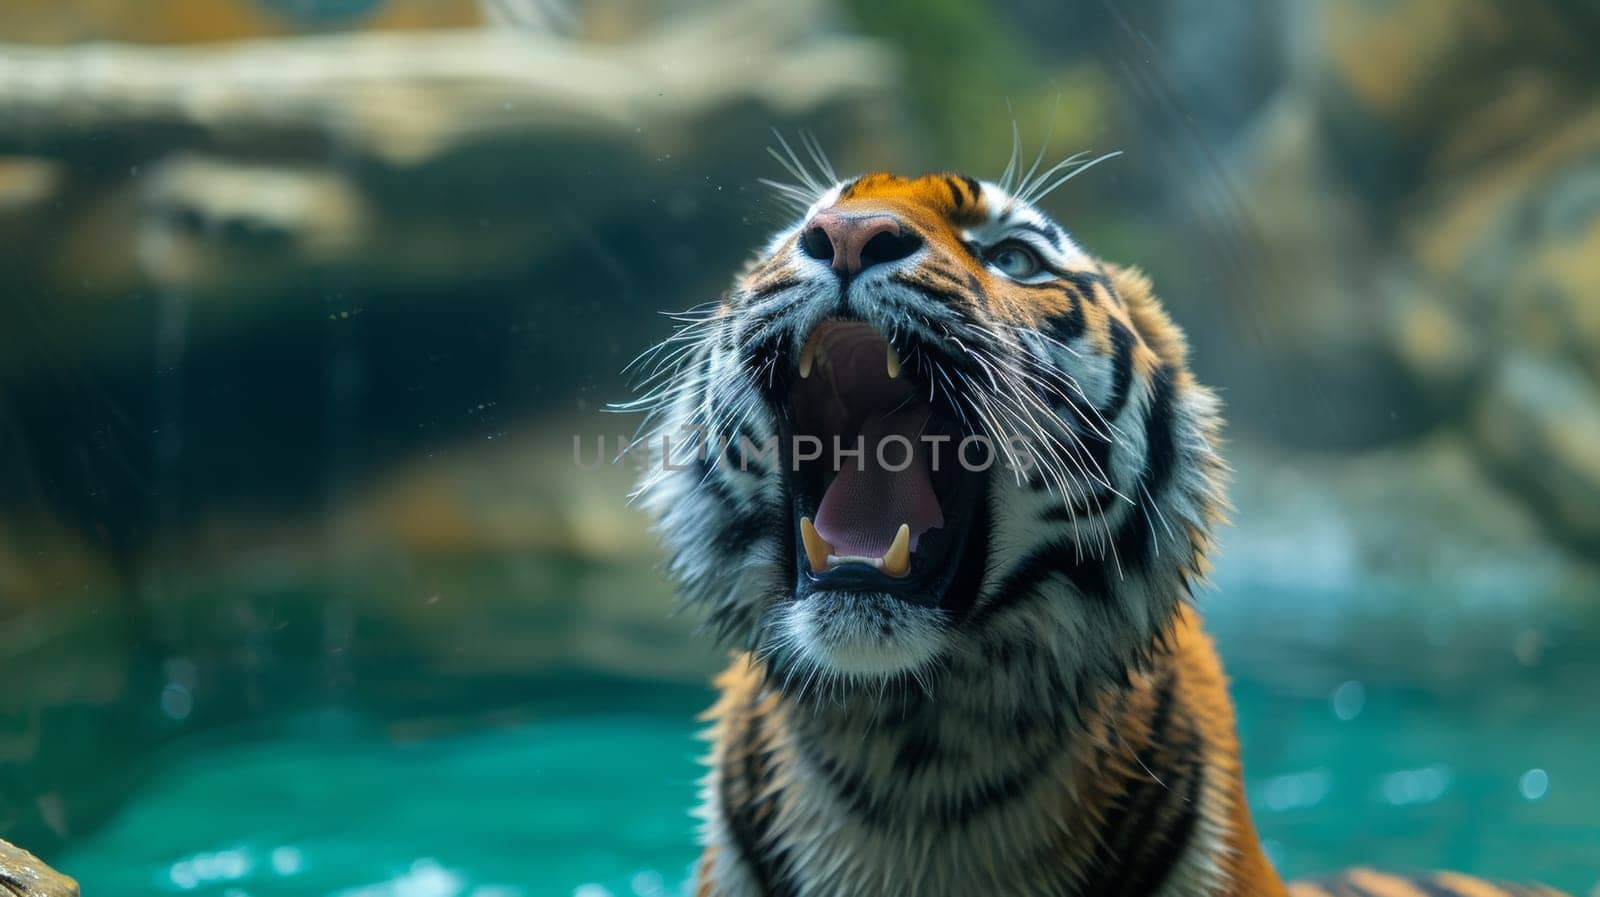 A tiger is roaring in the water with its mouth open